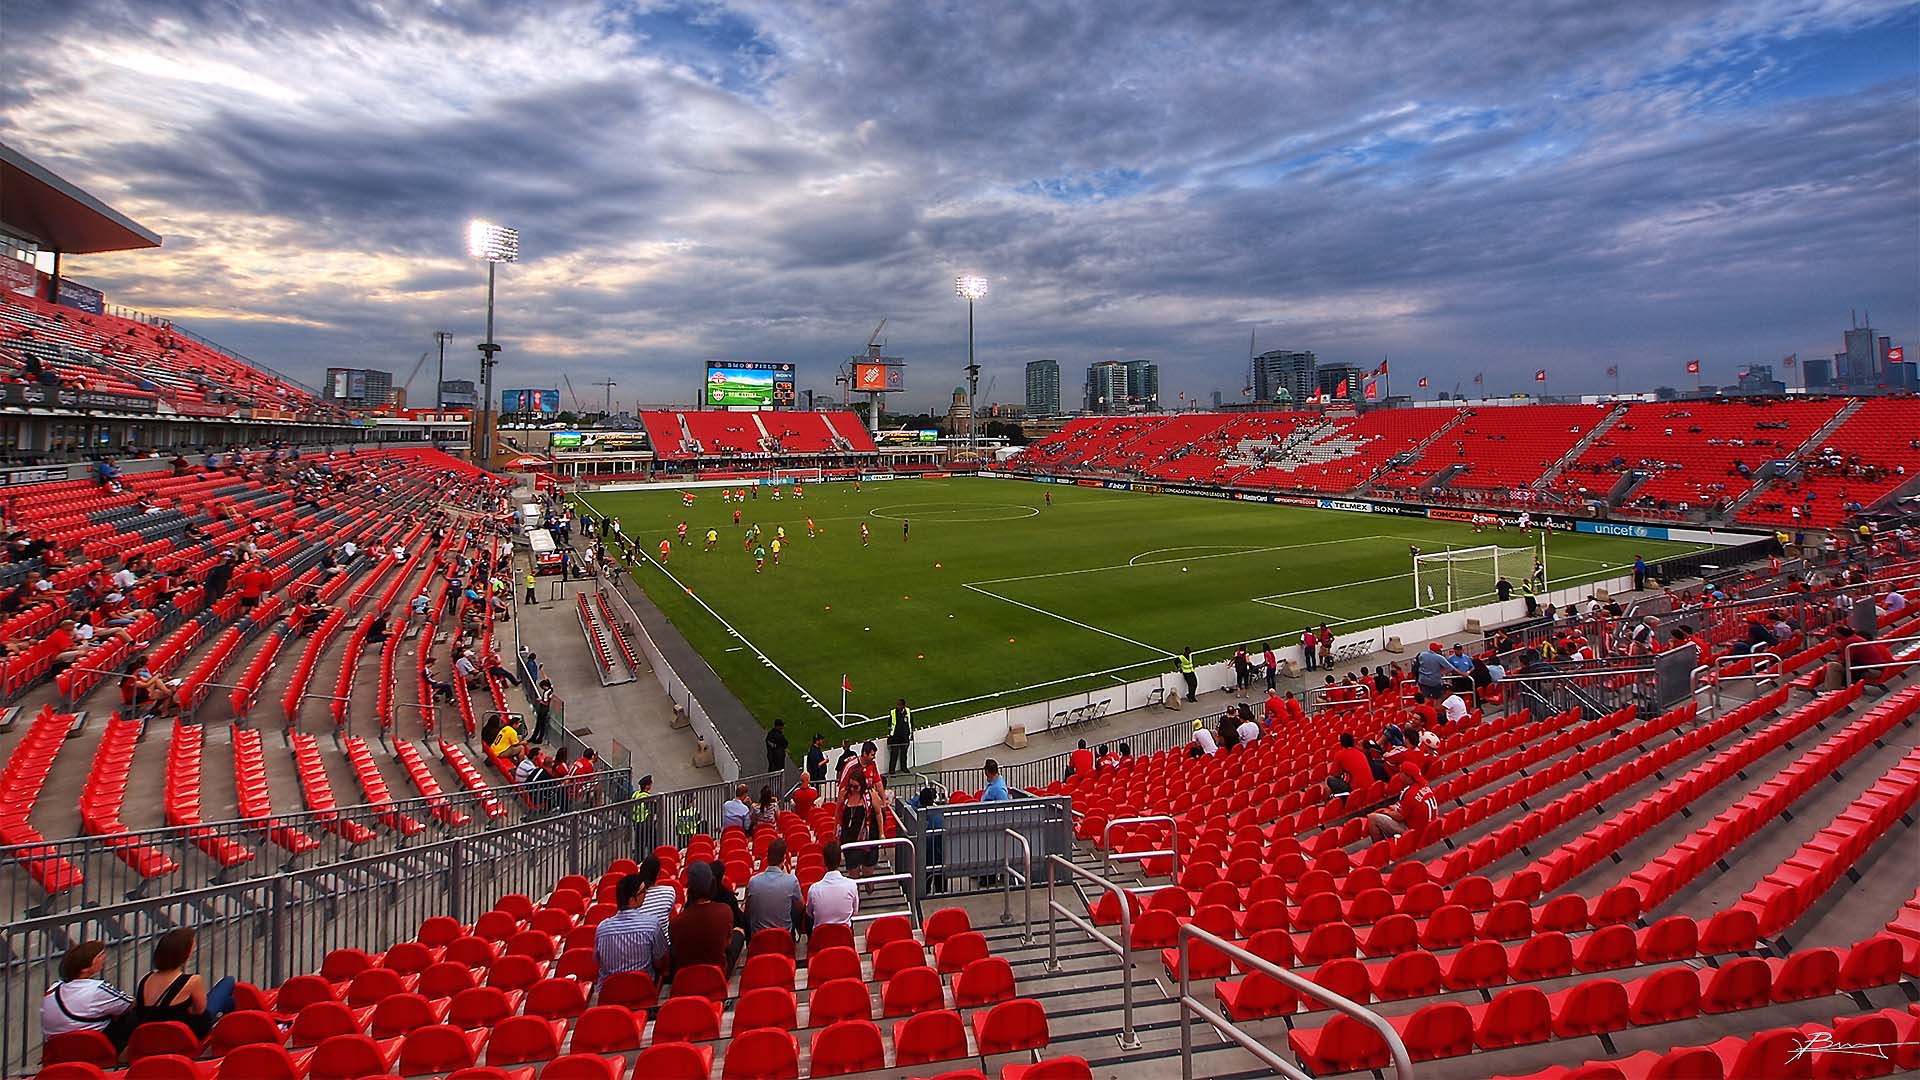 BMO Field as fans are filling the grandstands and bleacher seats.